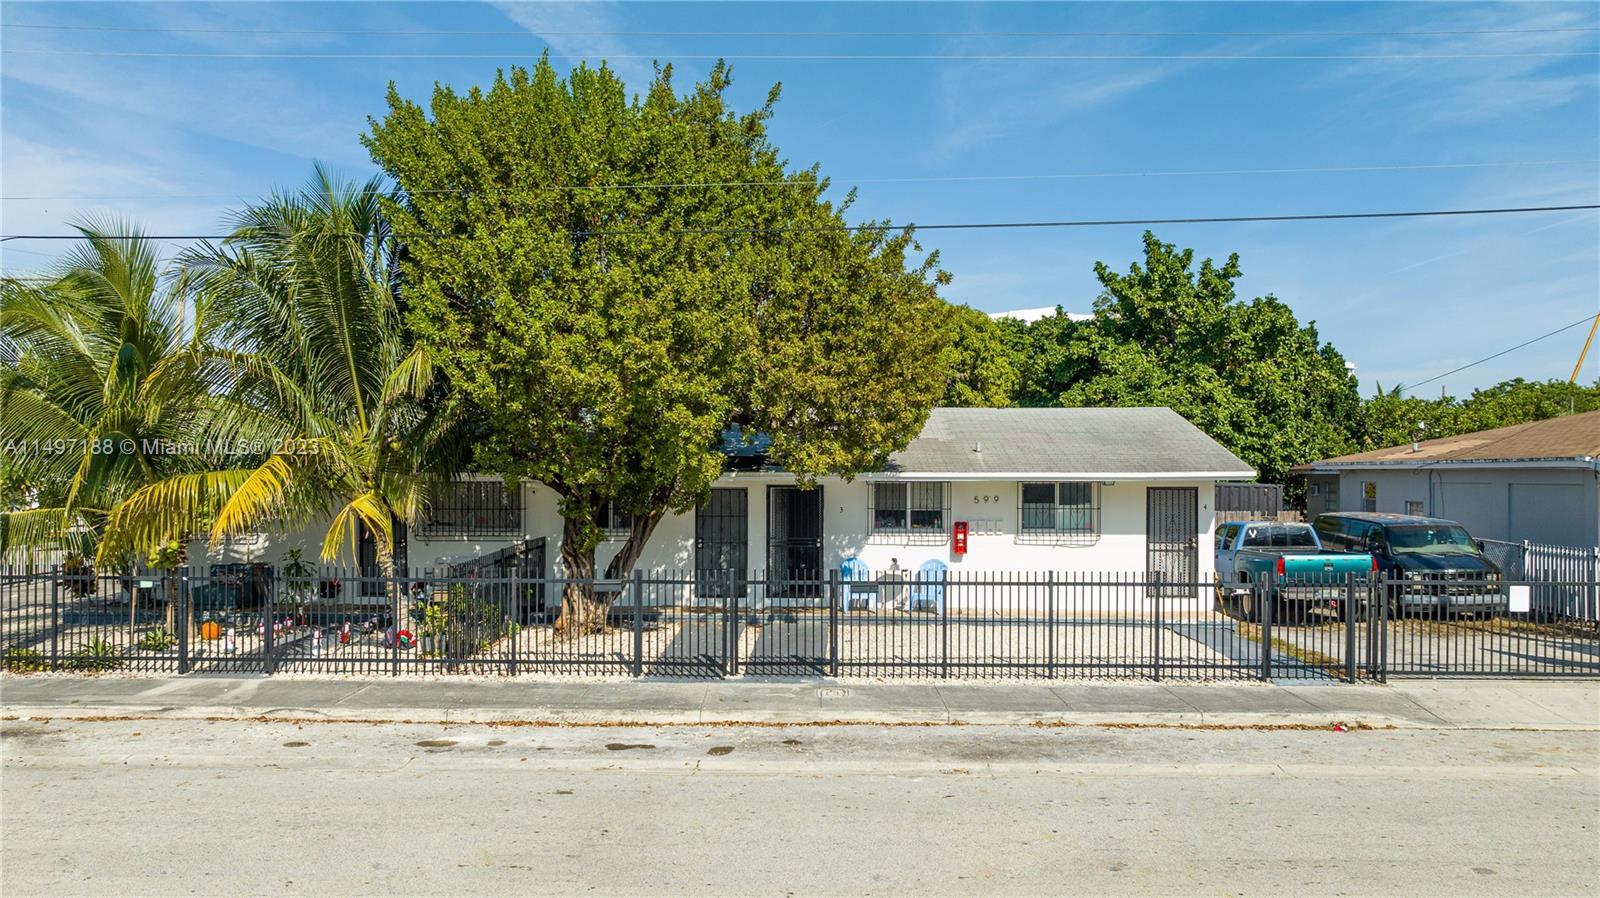 Photo of 599 NW 33rd St in Miami, FL